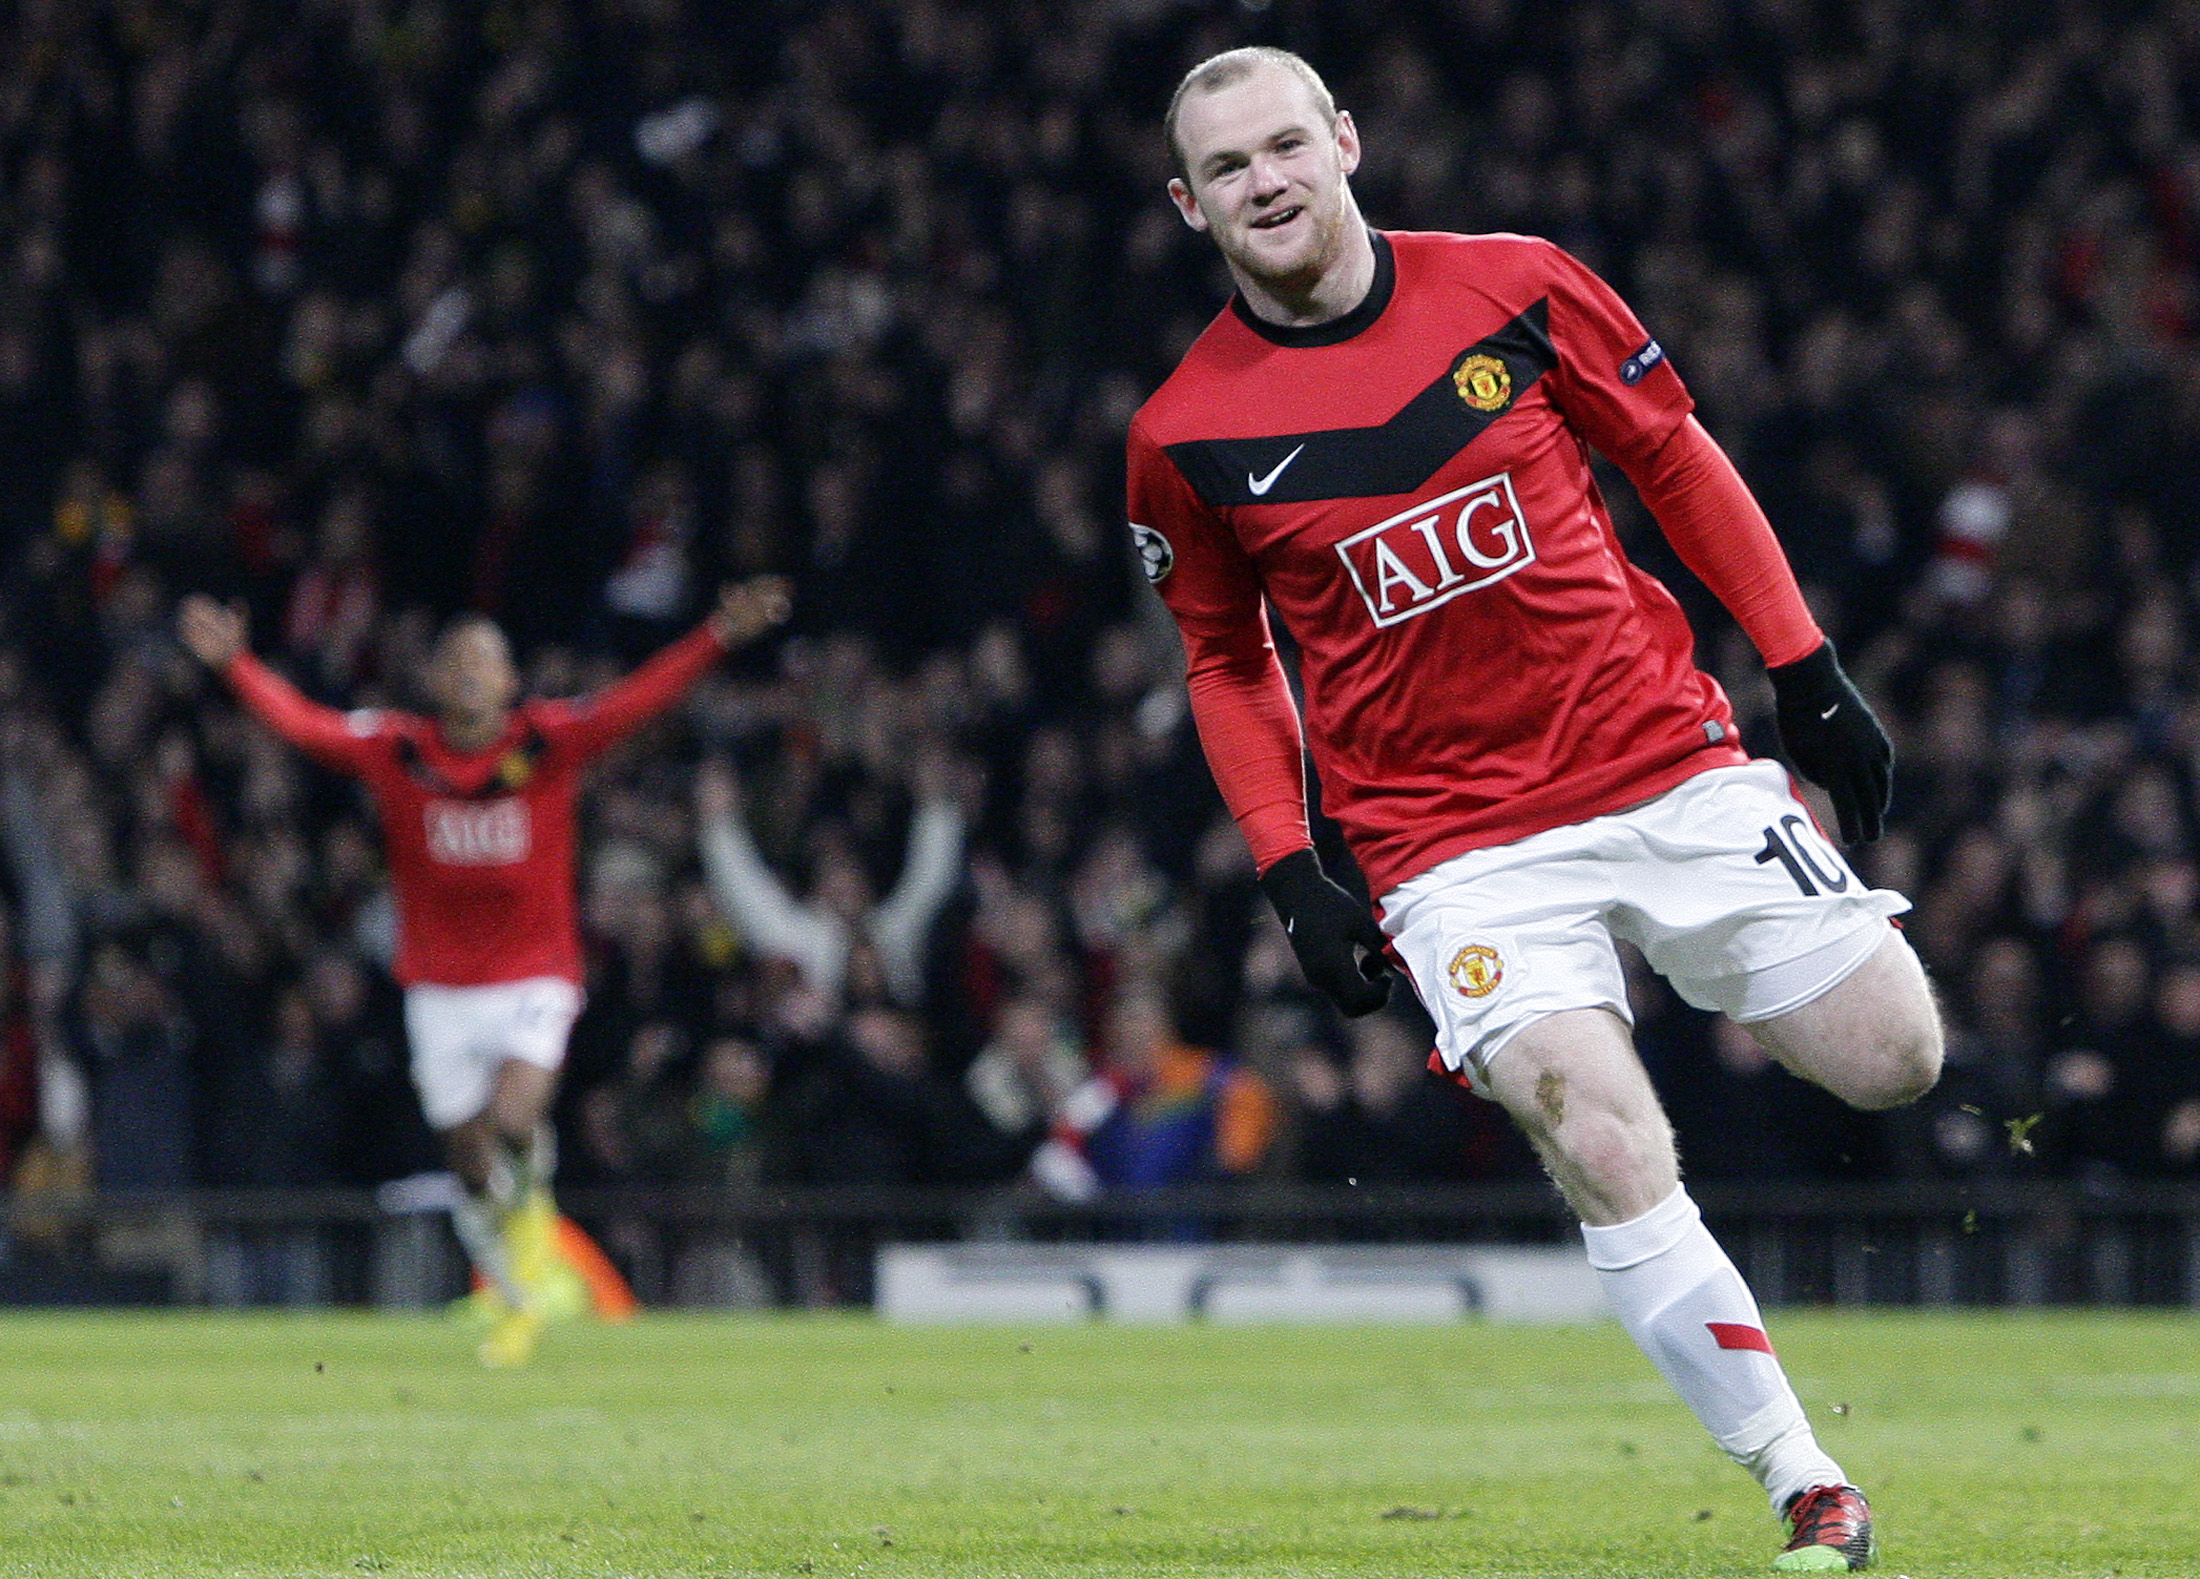 Champions League, Manchester United, Barcelona, Wayne Rooney, Lionel Messi